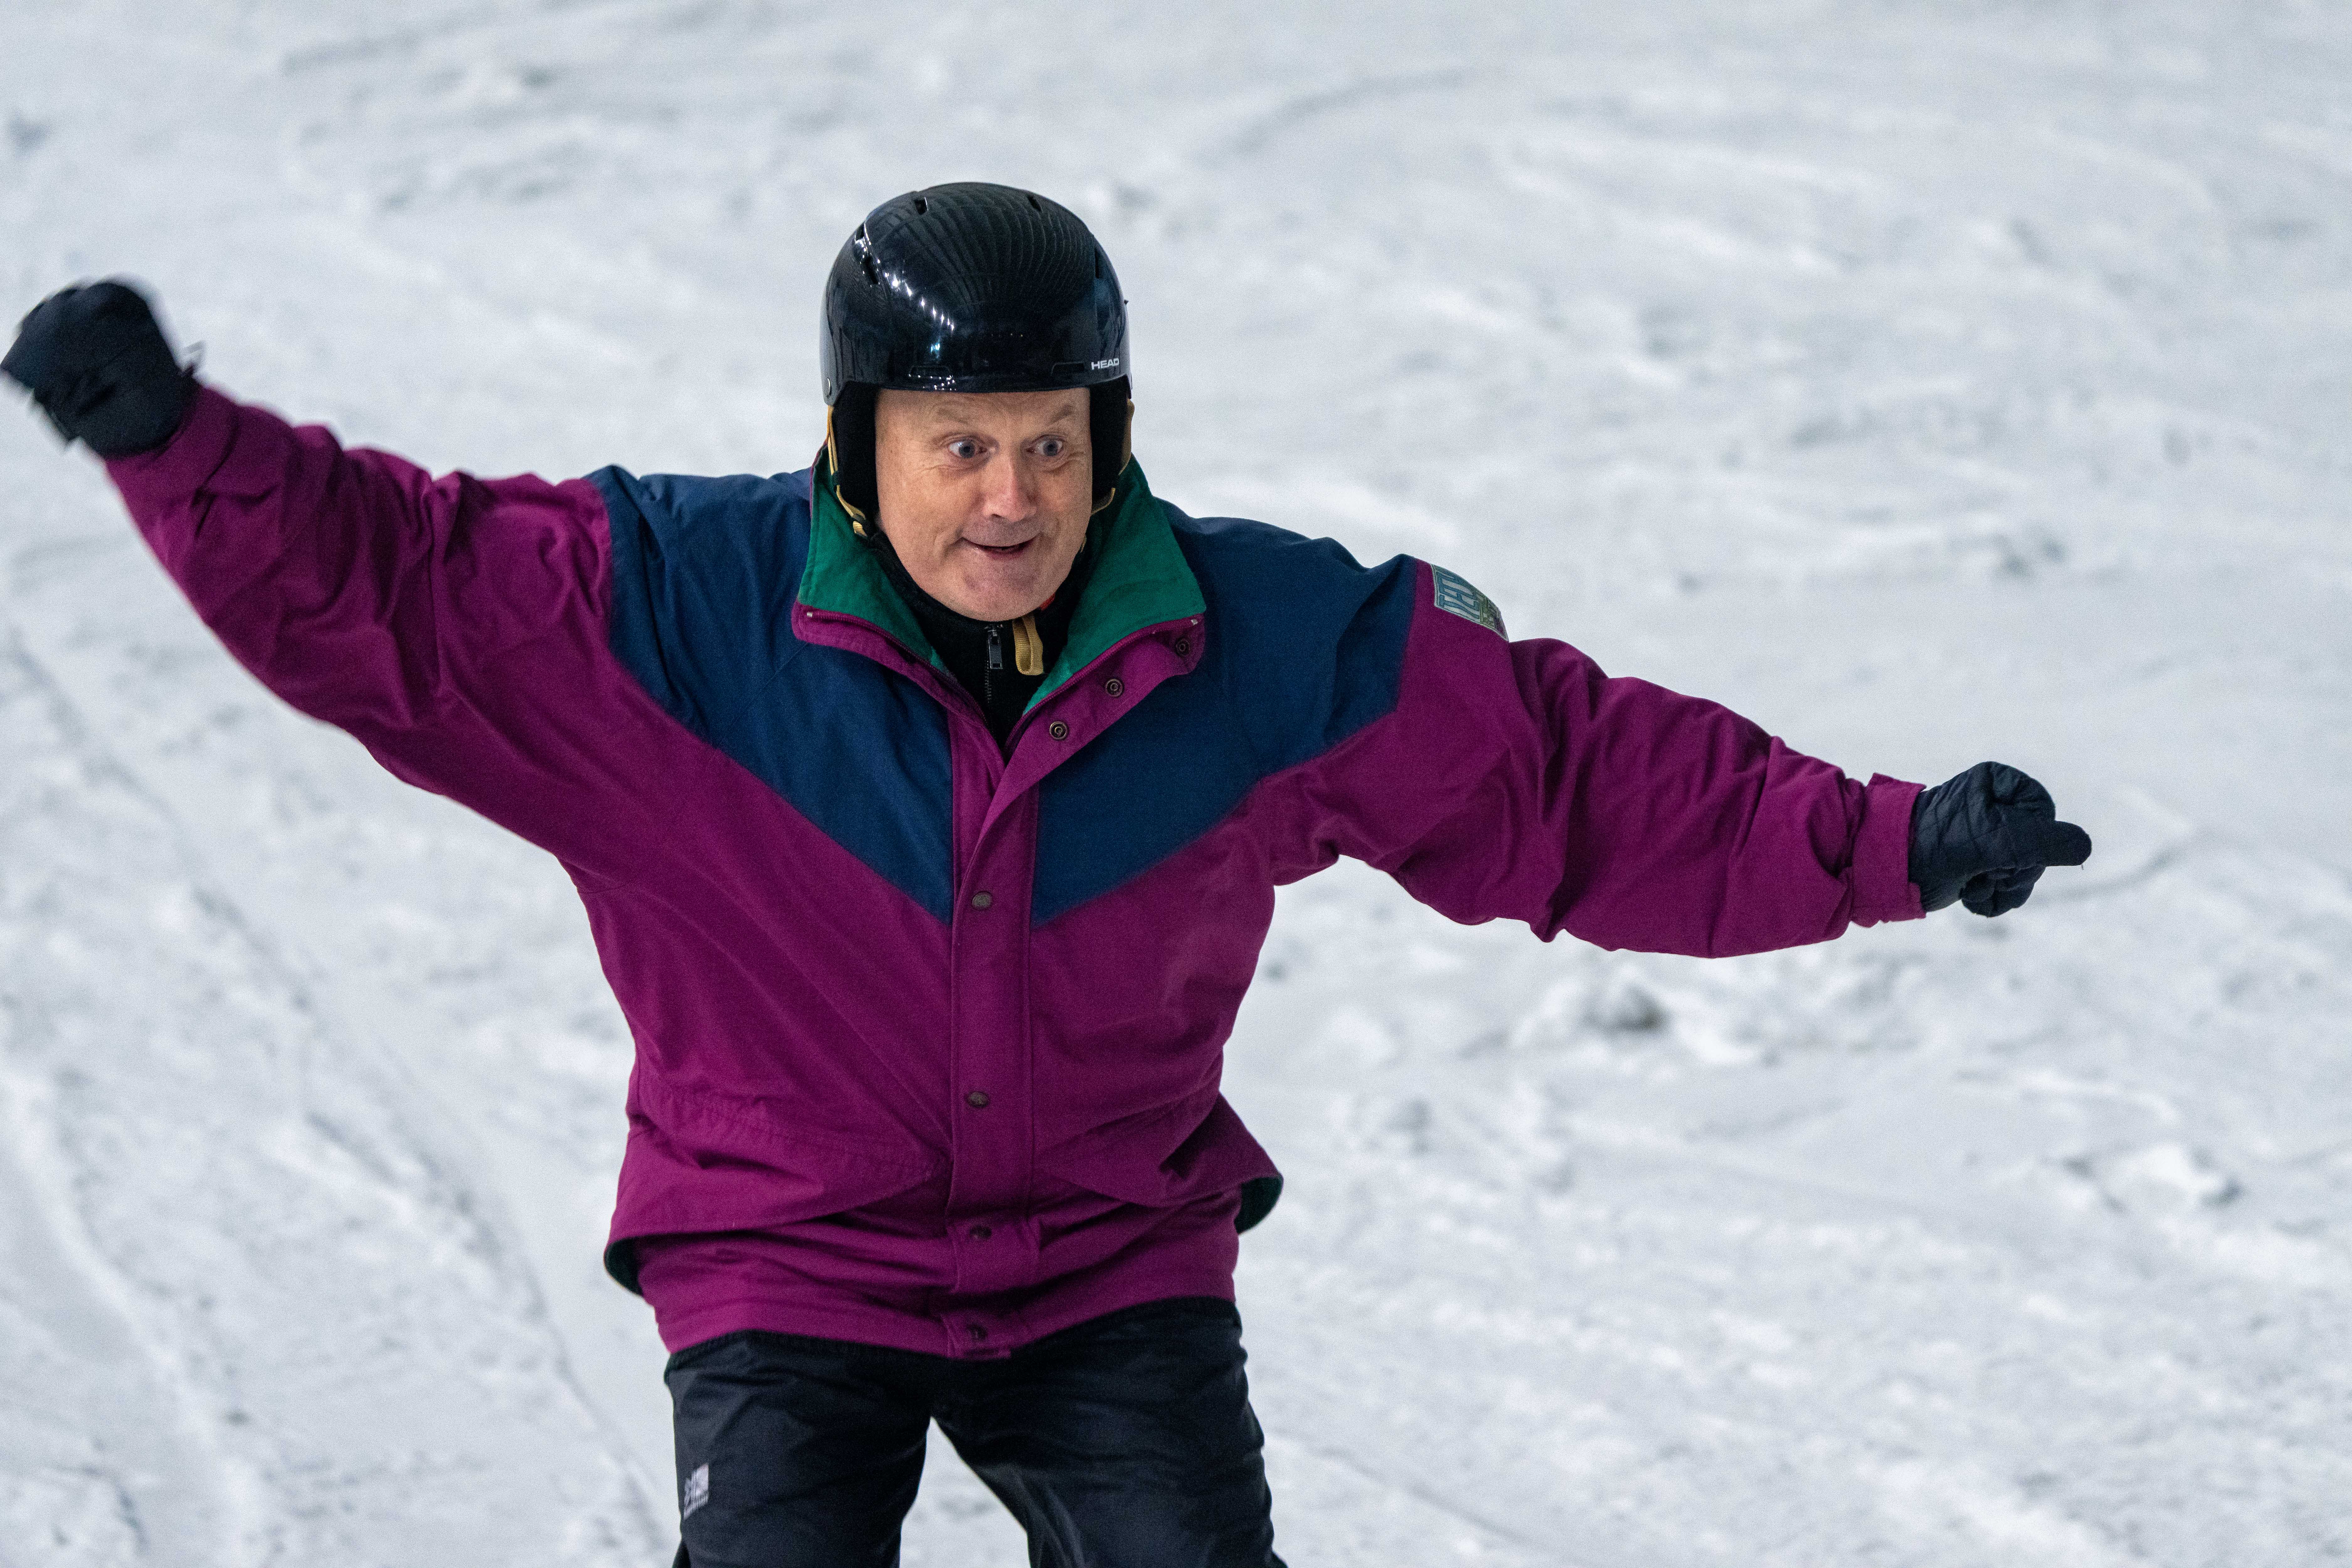 Whether taking up skiing or conquering a mountain more people over 50s are keen to embrace new challenges